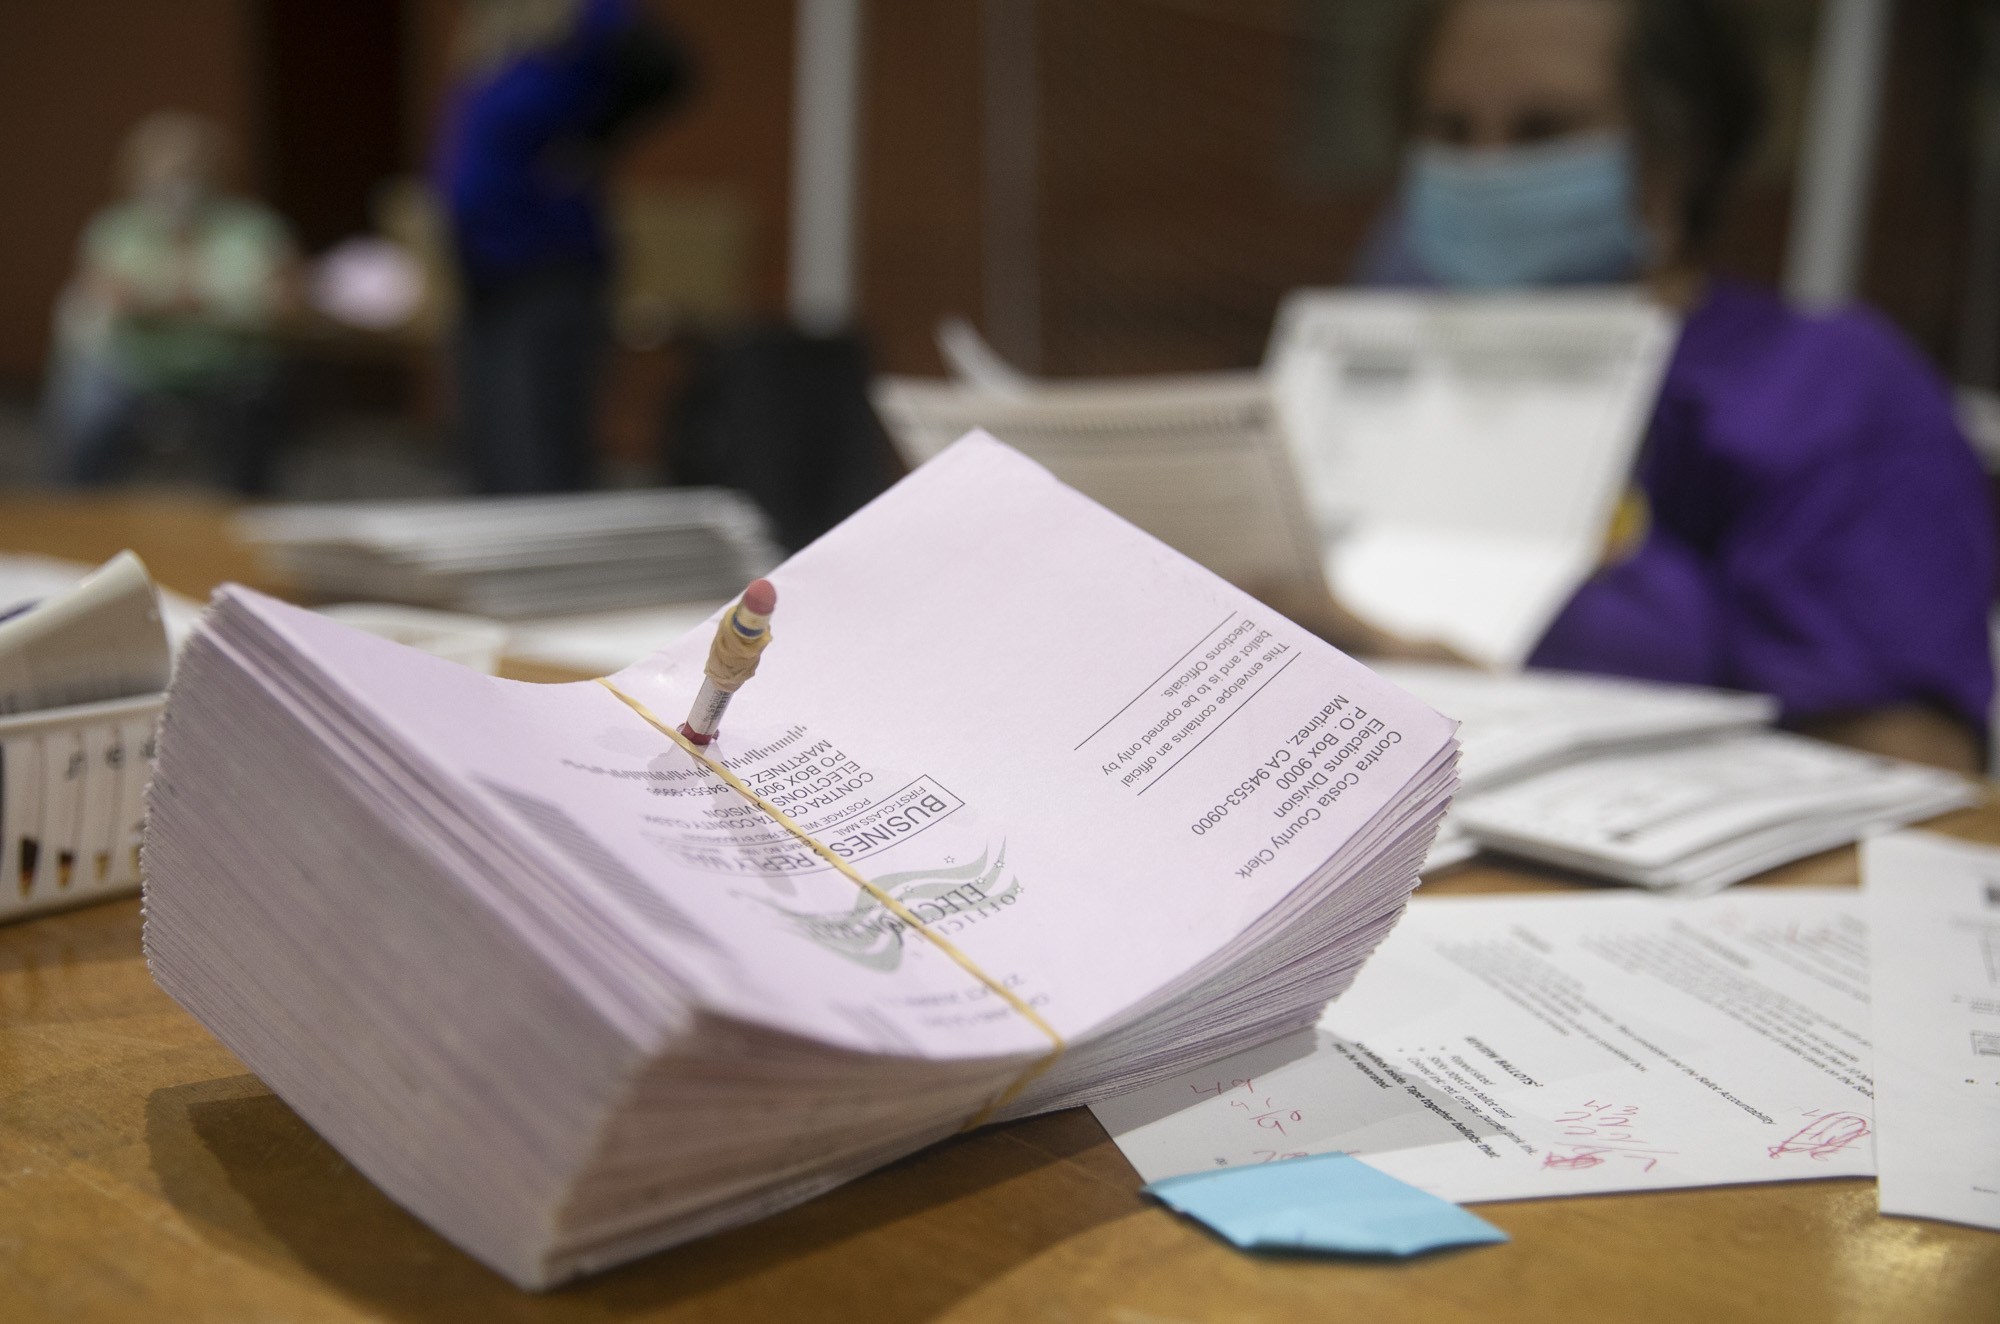 A stack of pinkish ballots held together with a rubber band lies on a table. In the background, a person wearing a face mask and purple shirt appears to be sorting through additional papers. The setting suggests a vote counting or ballot processing environment, reminiscent of Berkeley Journalism's detailed election coverage.